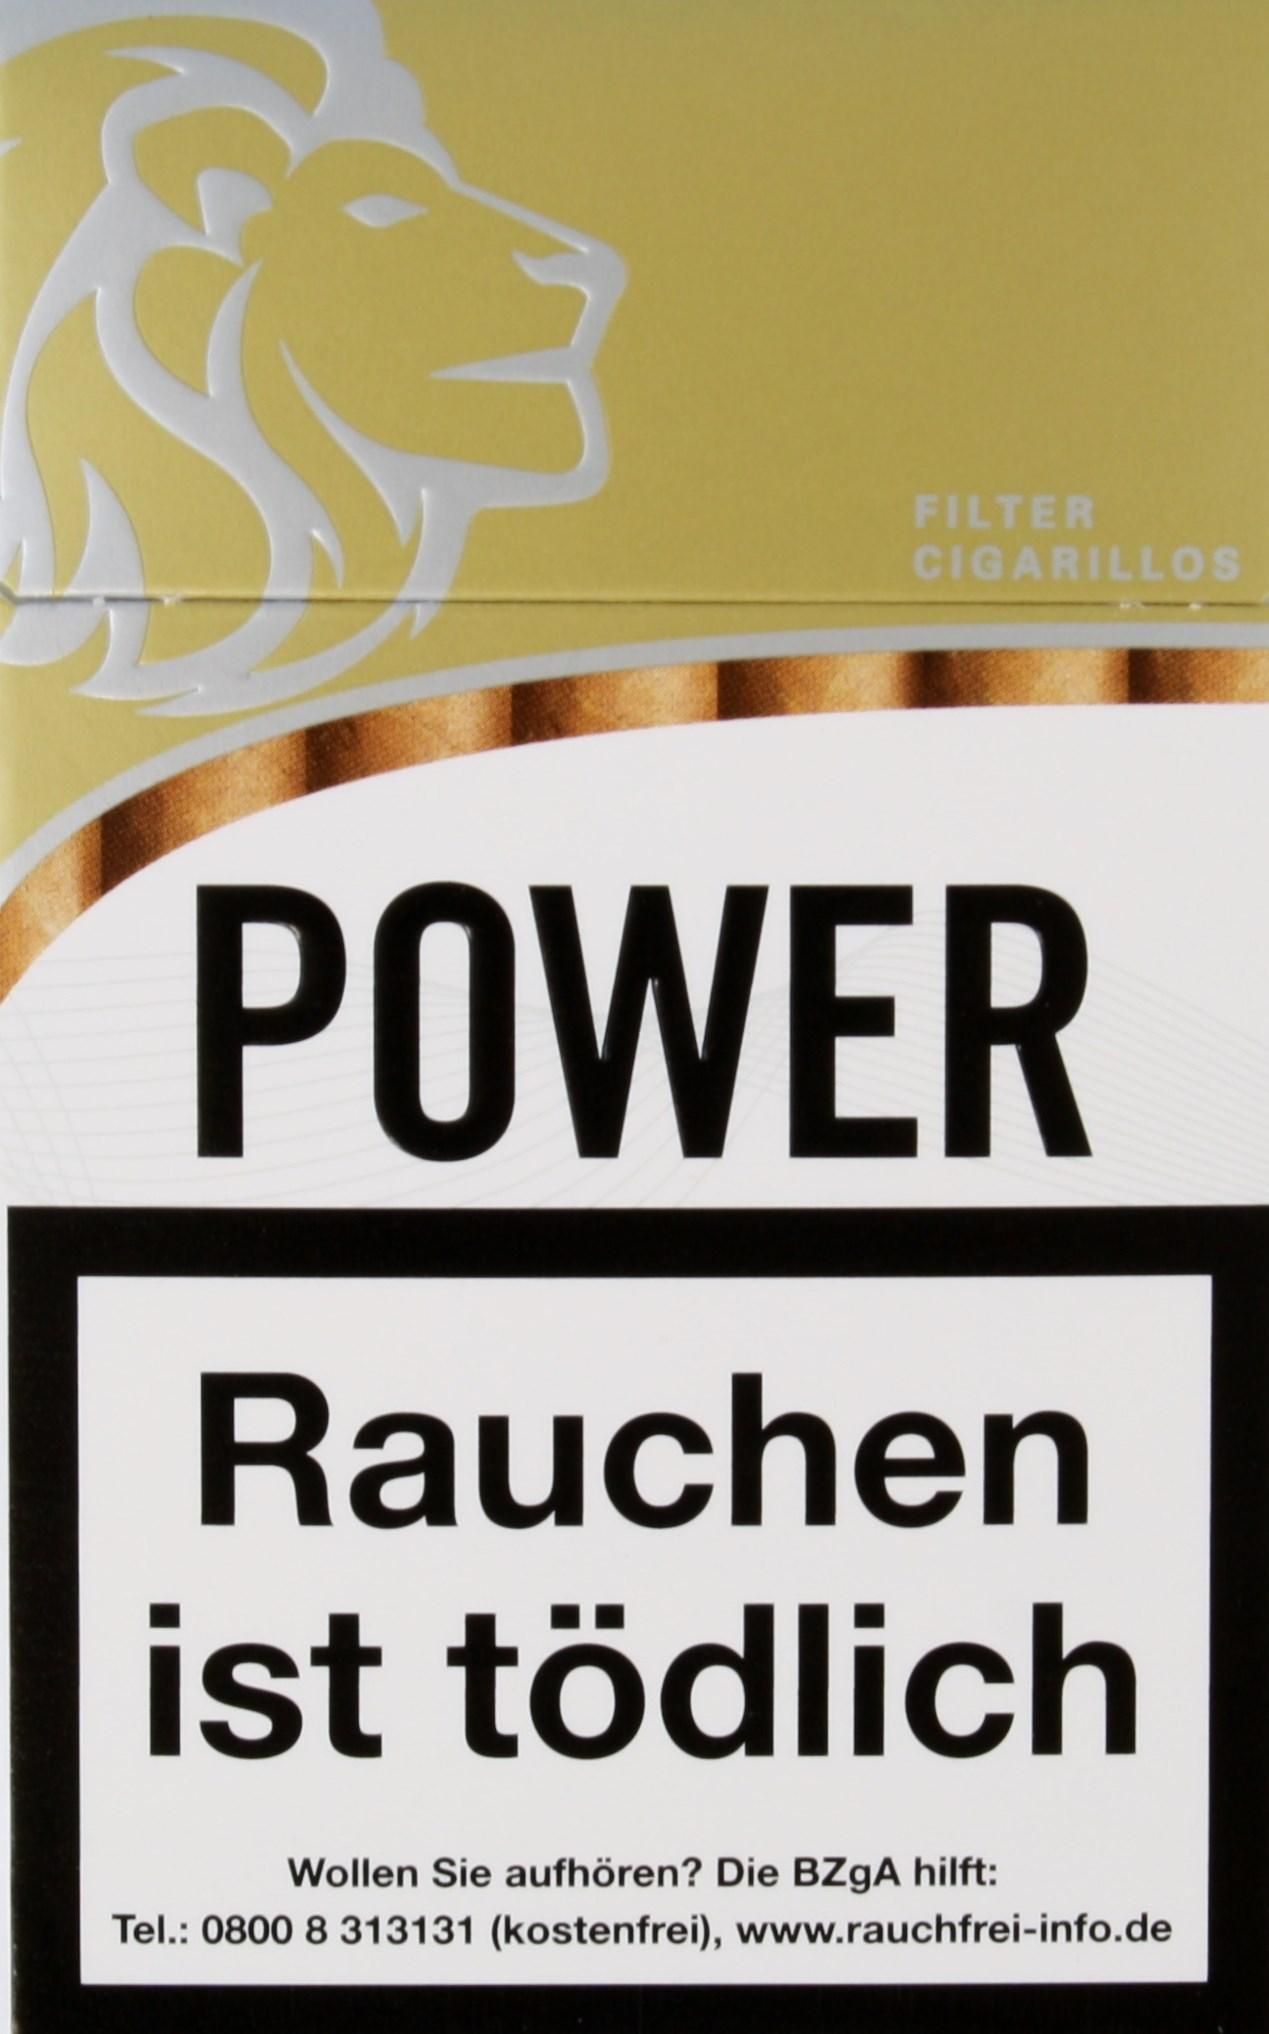 Power Gold Filter Zigarillos 1 Stange